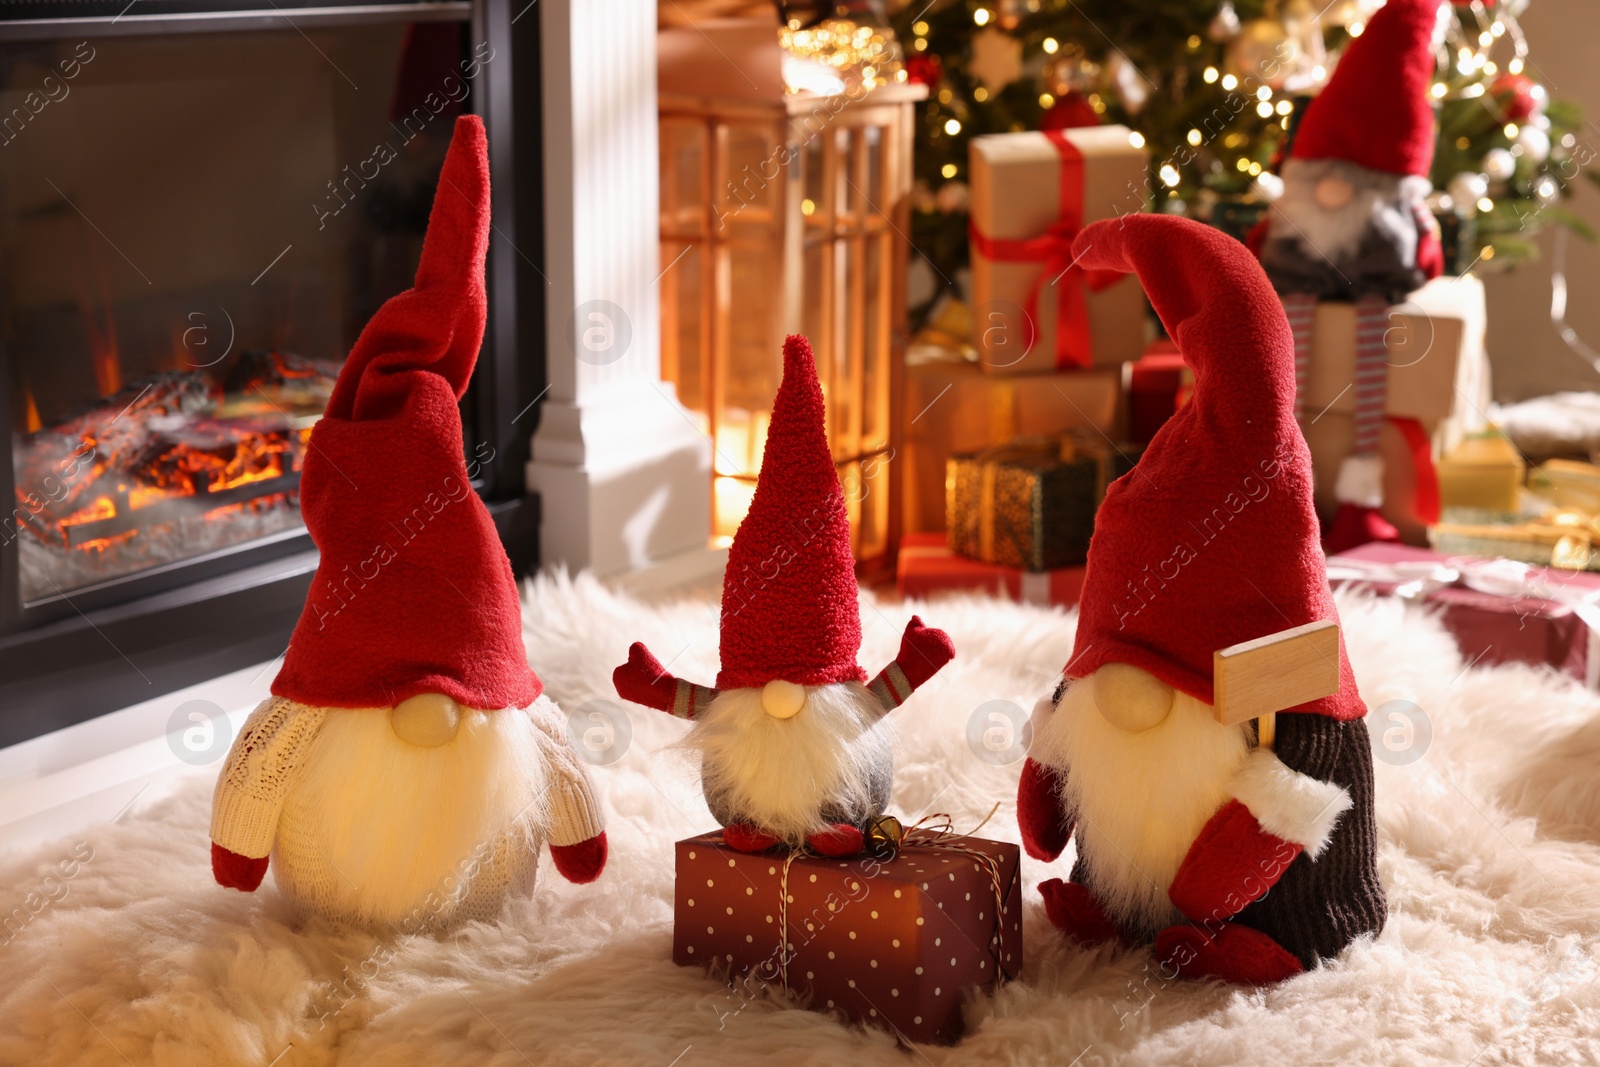 Photo of Cute Christmas gnomes and gift in room with festive decorations